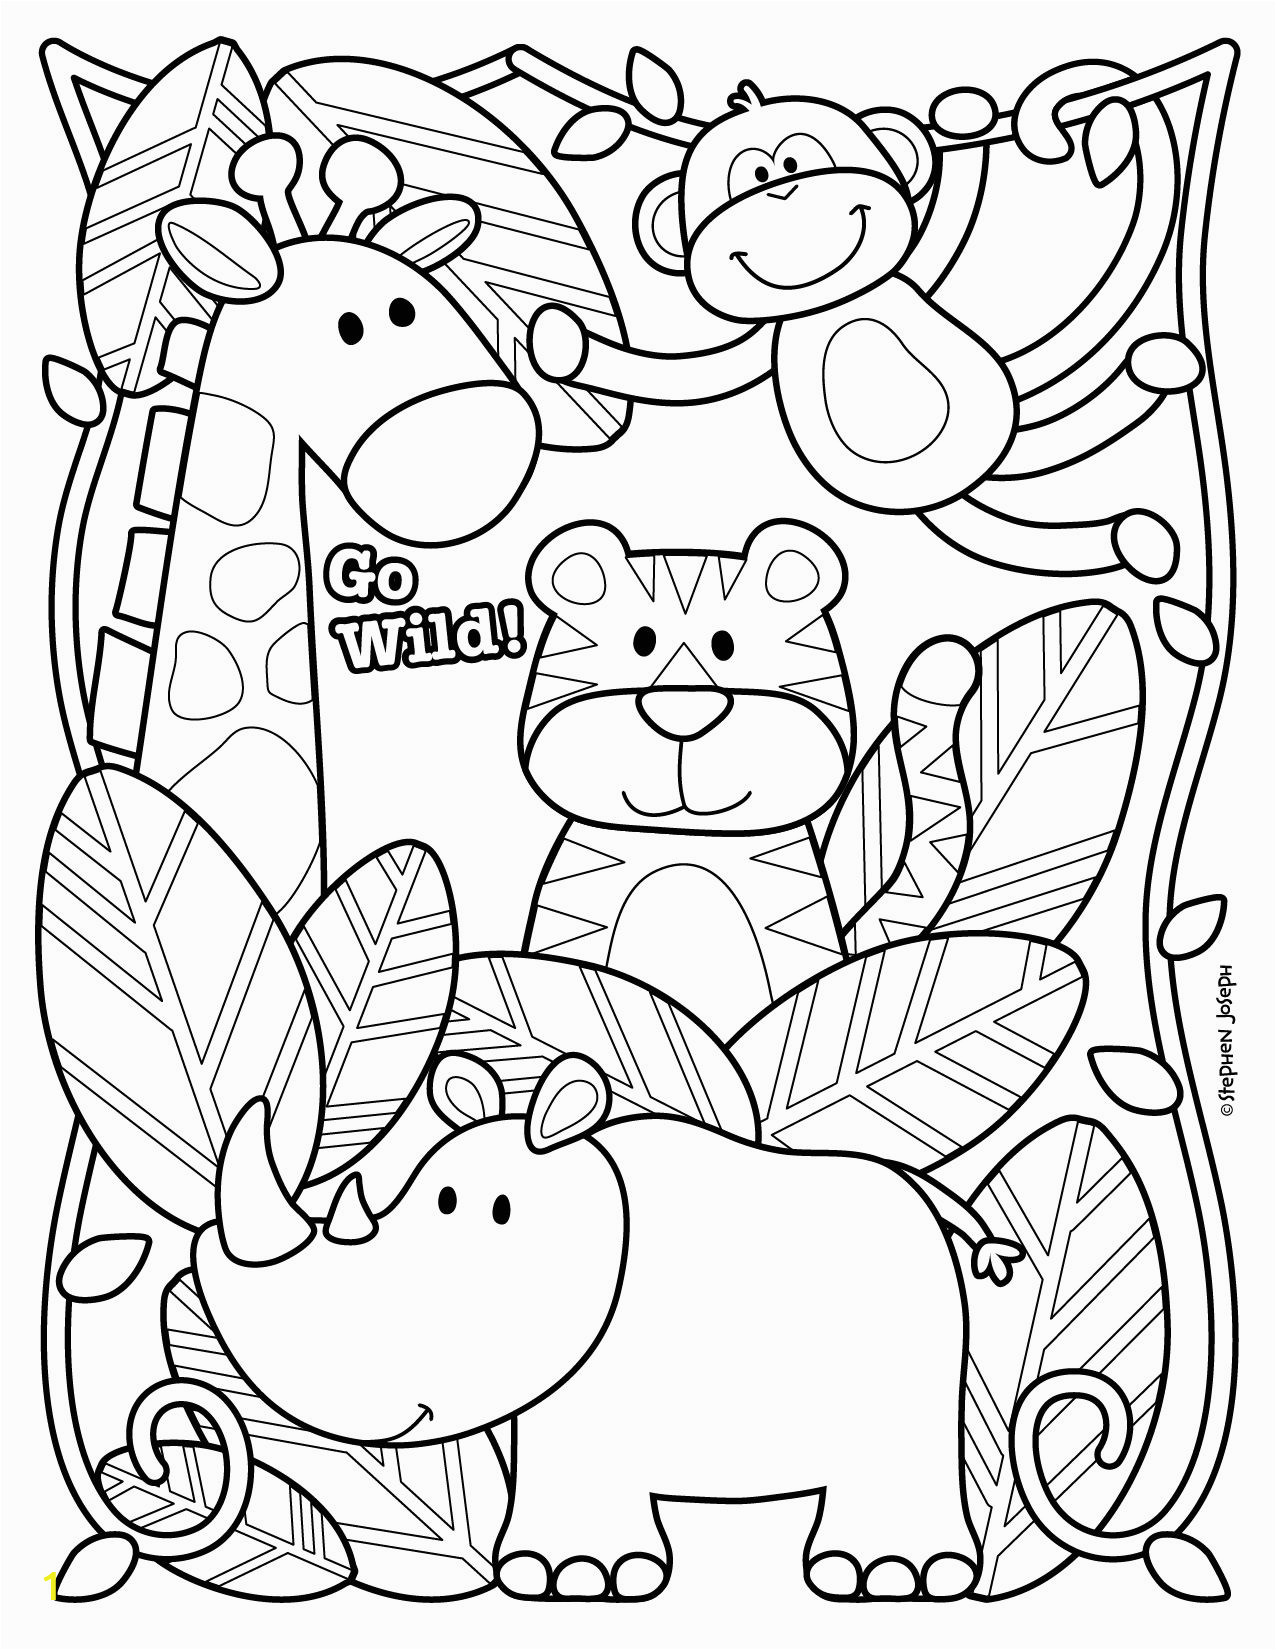 Free Preschool Coloring Pages Of Zoo Animals Free Printable Zoo Animal Coloring Pages Free Coloring Page